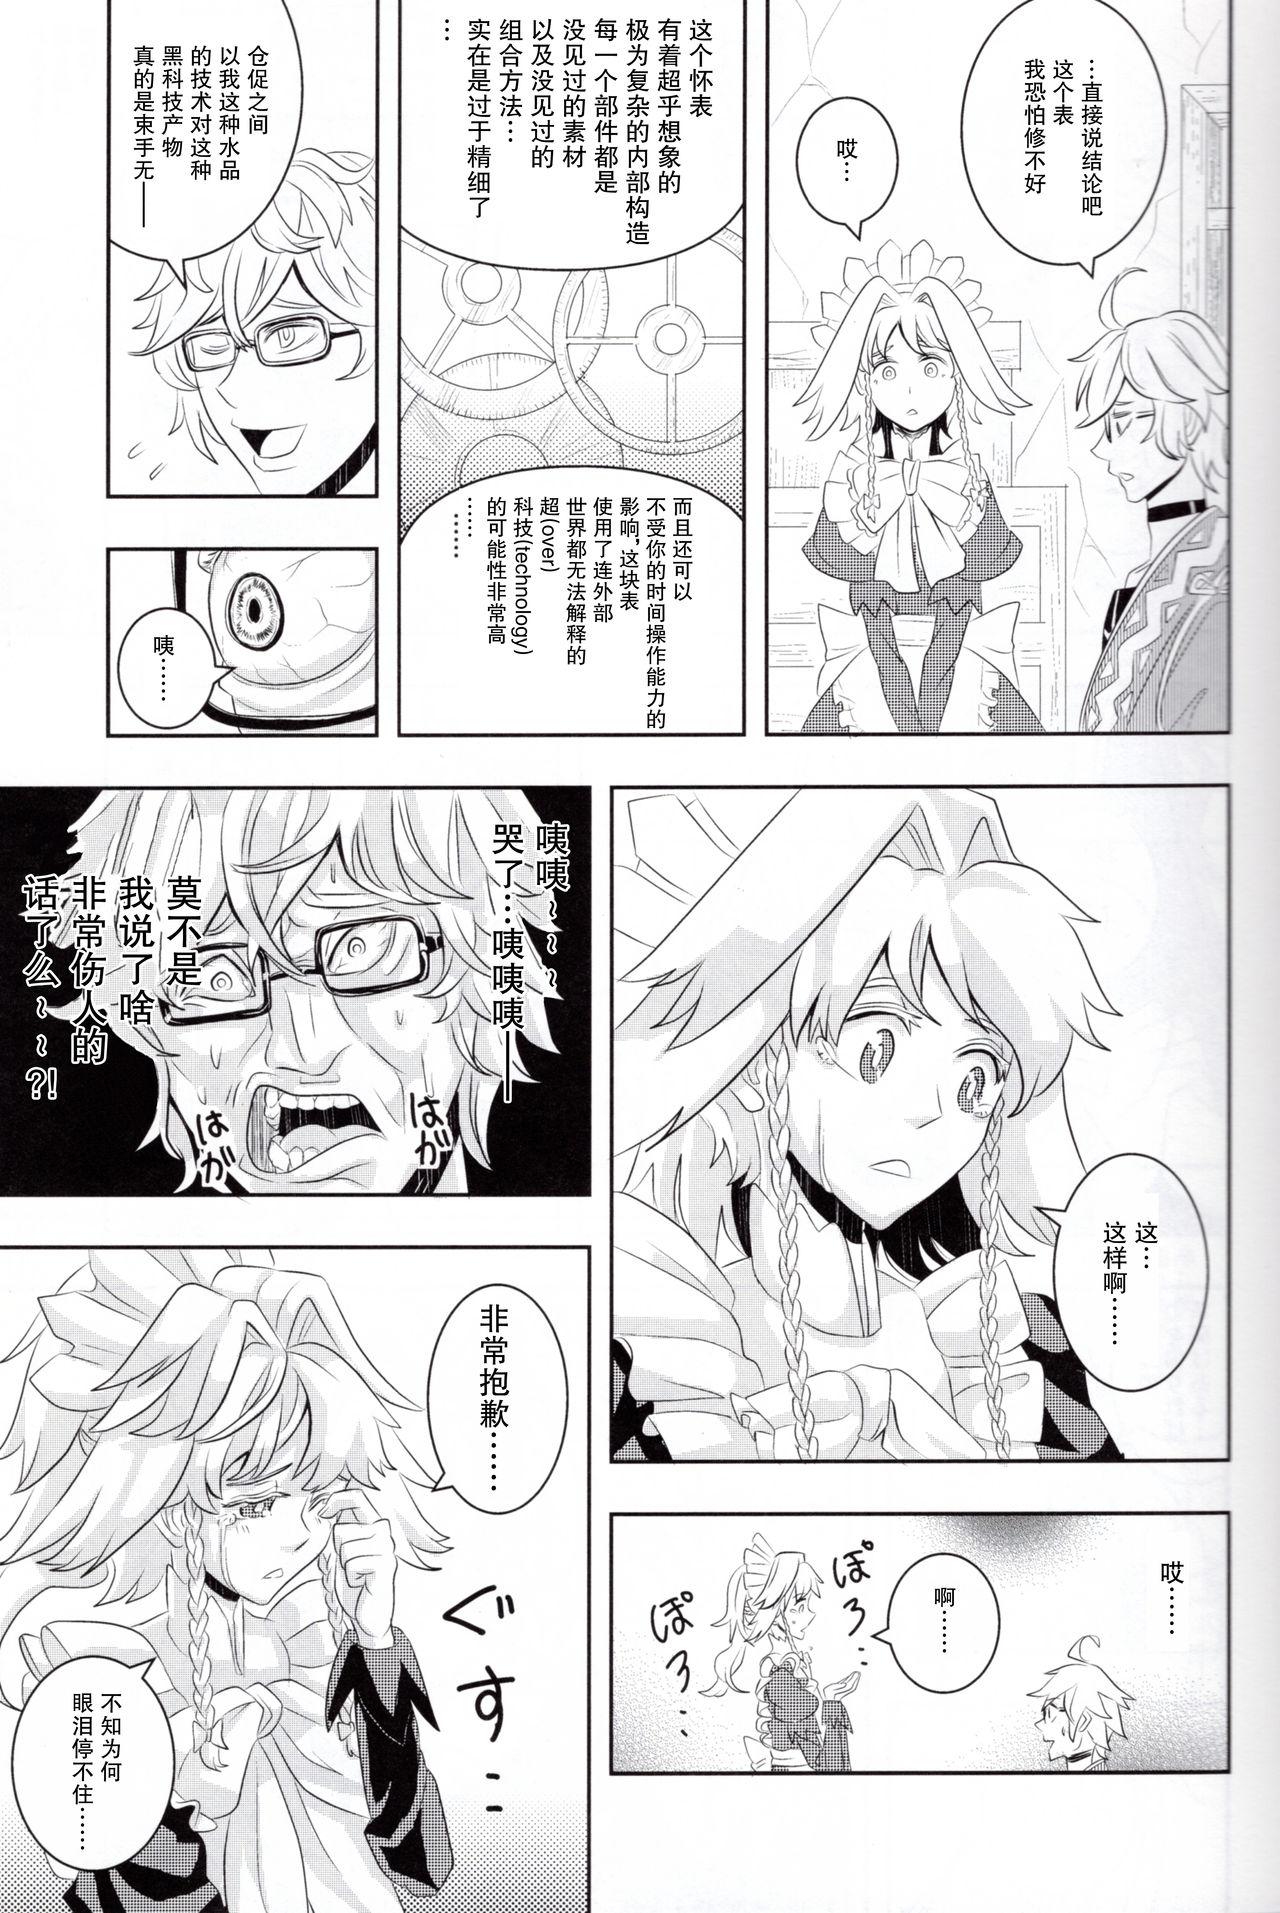 Funny Maid to Tenshu to Kaichuudokei to - Touhou project Office Sex - Page 4